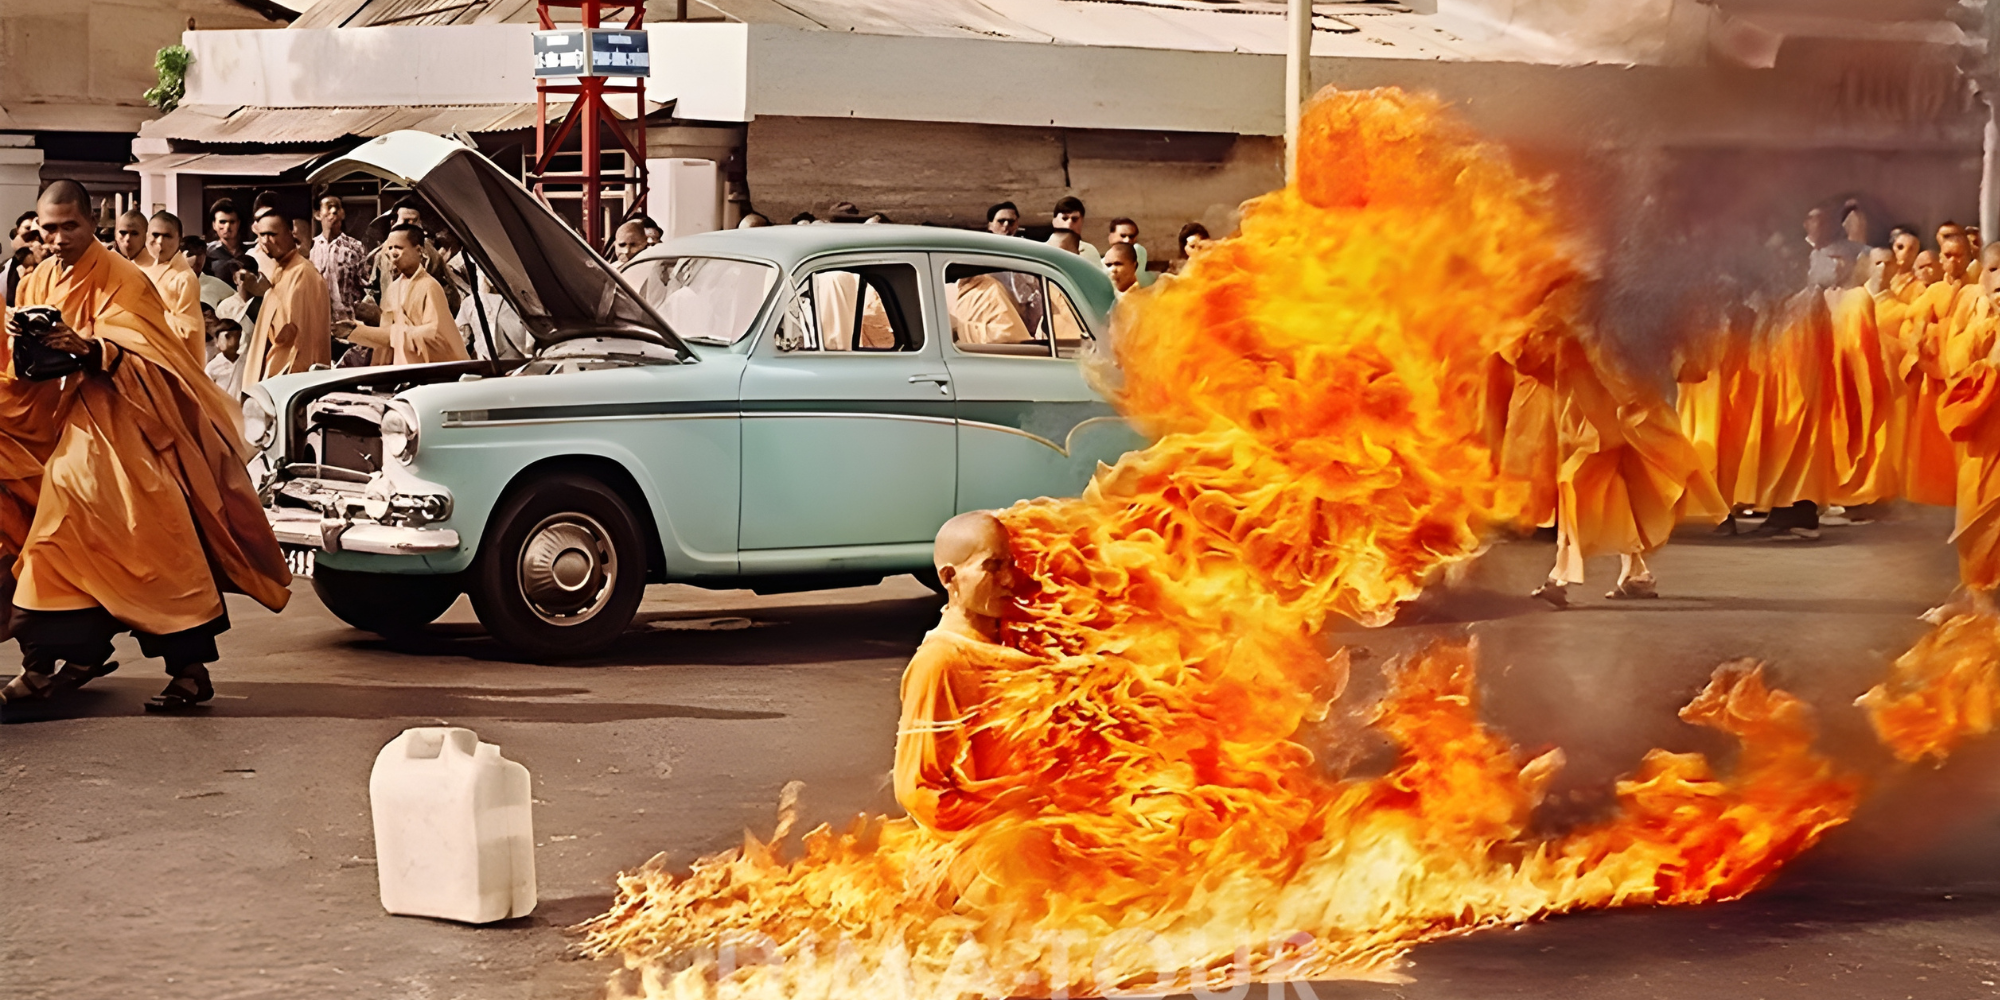 Thich Quang Duc: The Burning Monk's Fight for Change